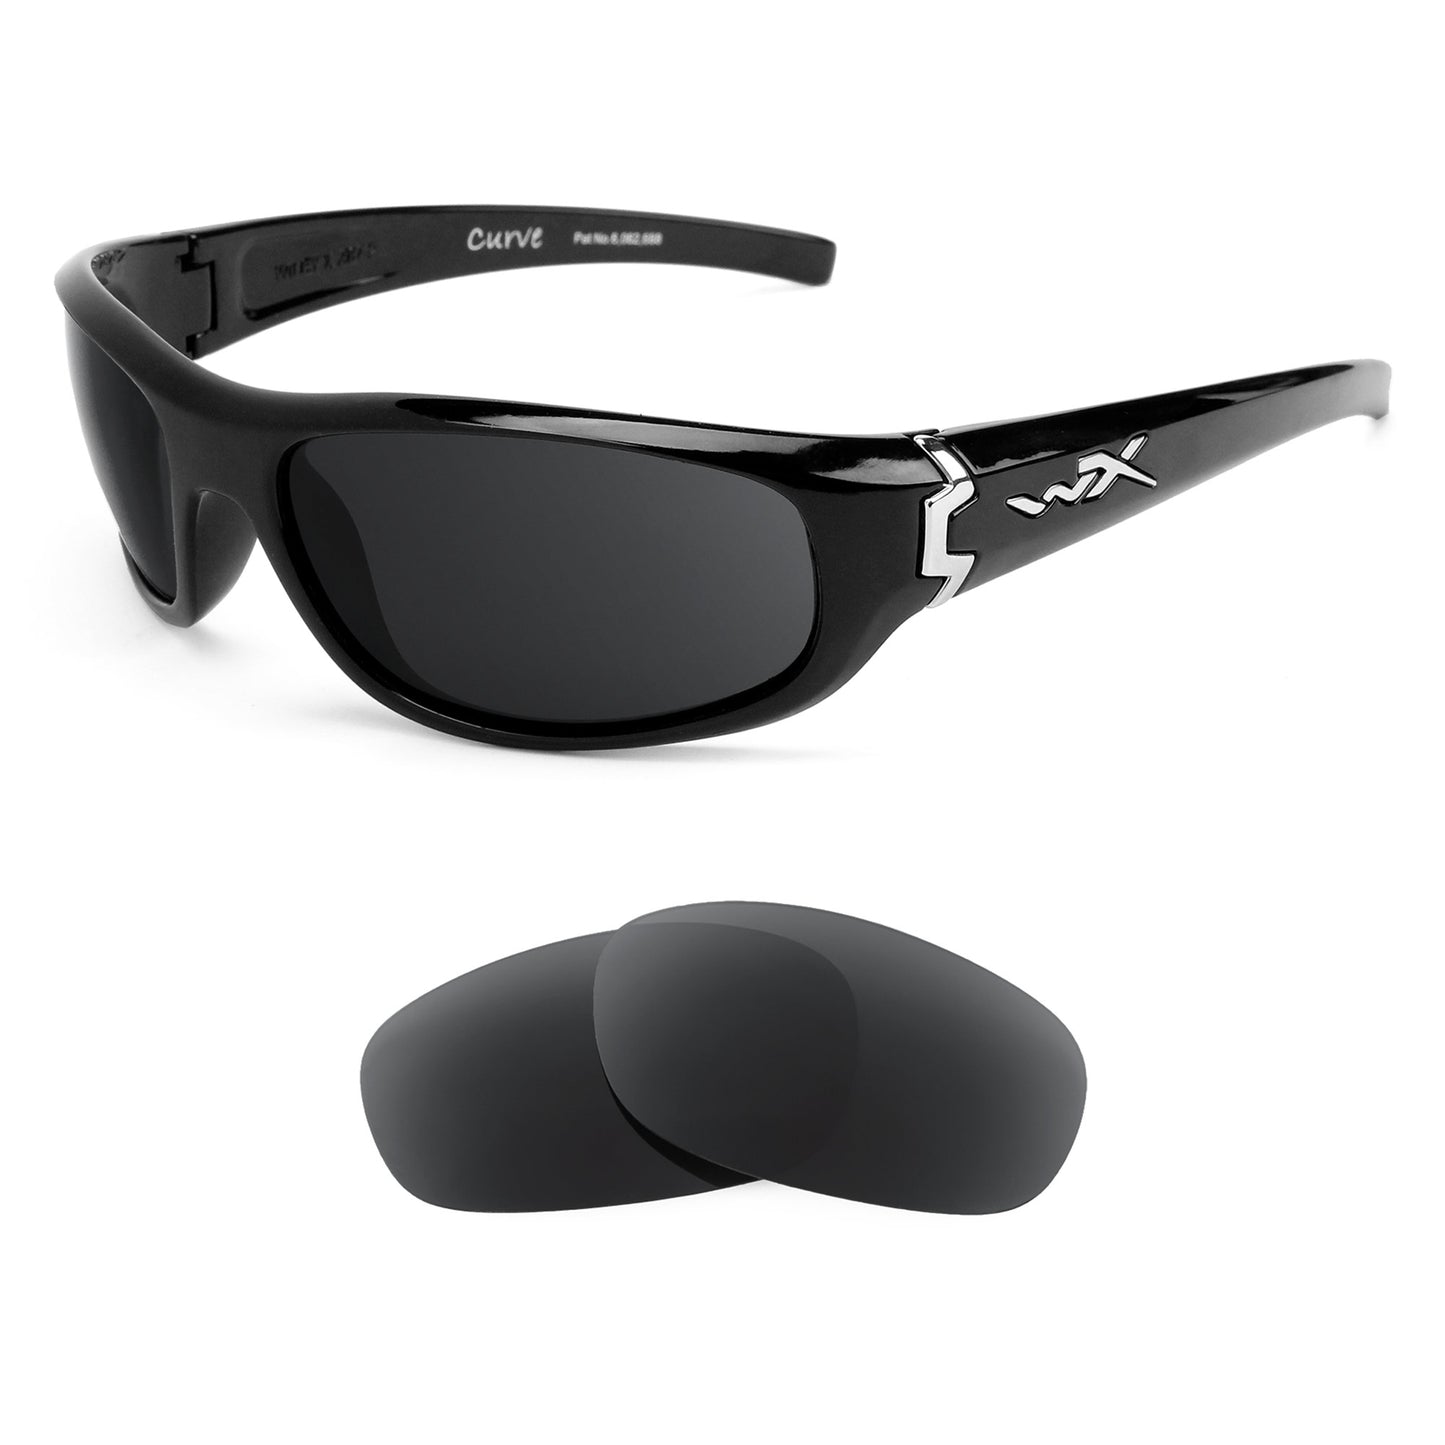 Wiley X Curve sunglasses with replacement lenses